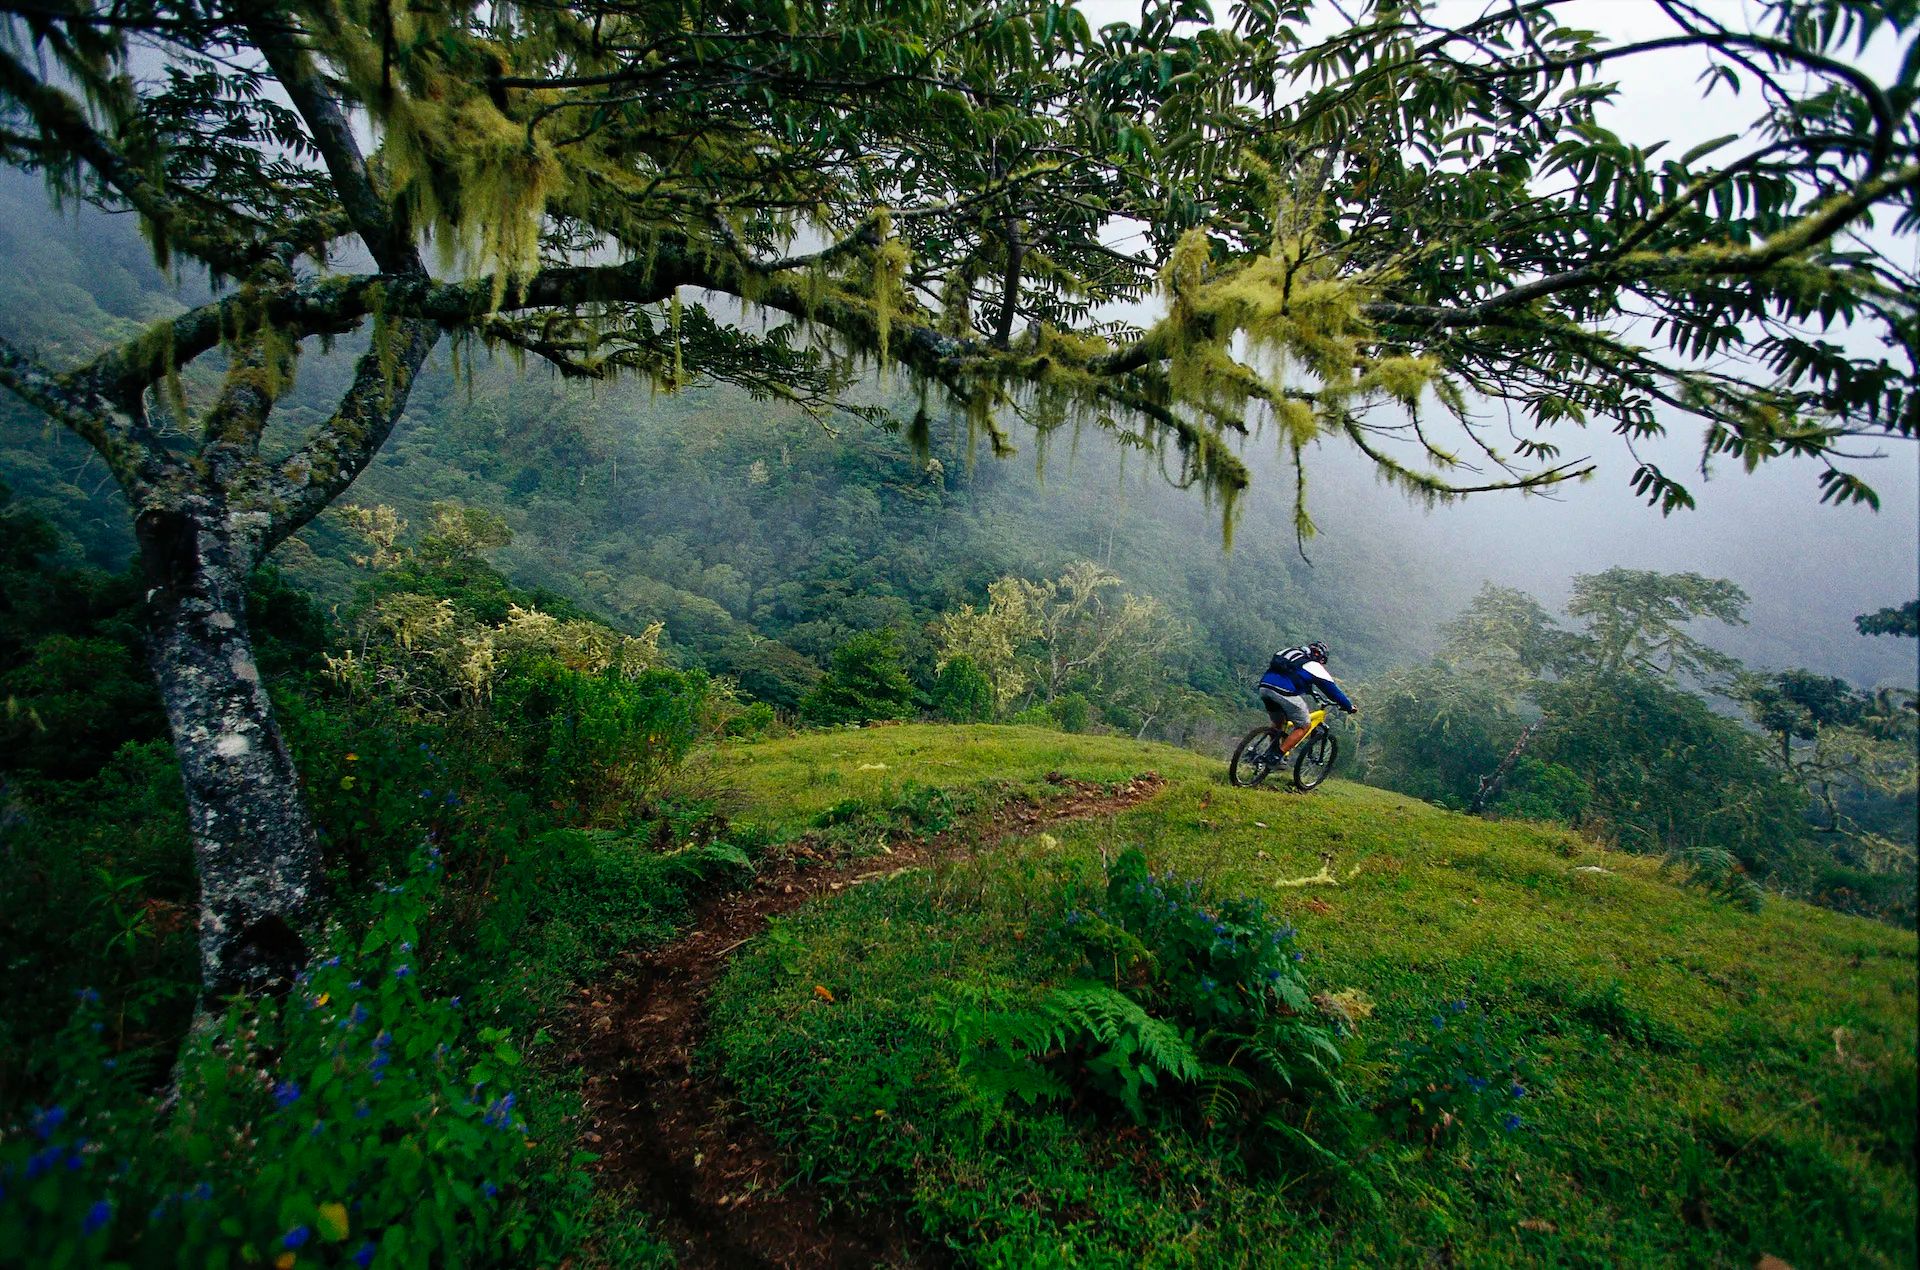 A cyclist on the trail in the Costa Rican rainforest.